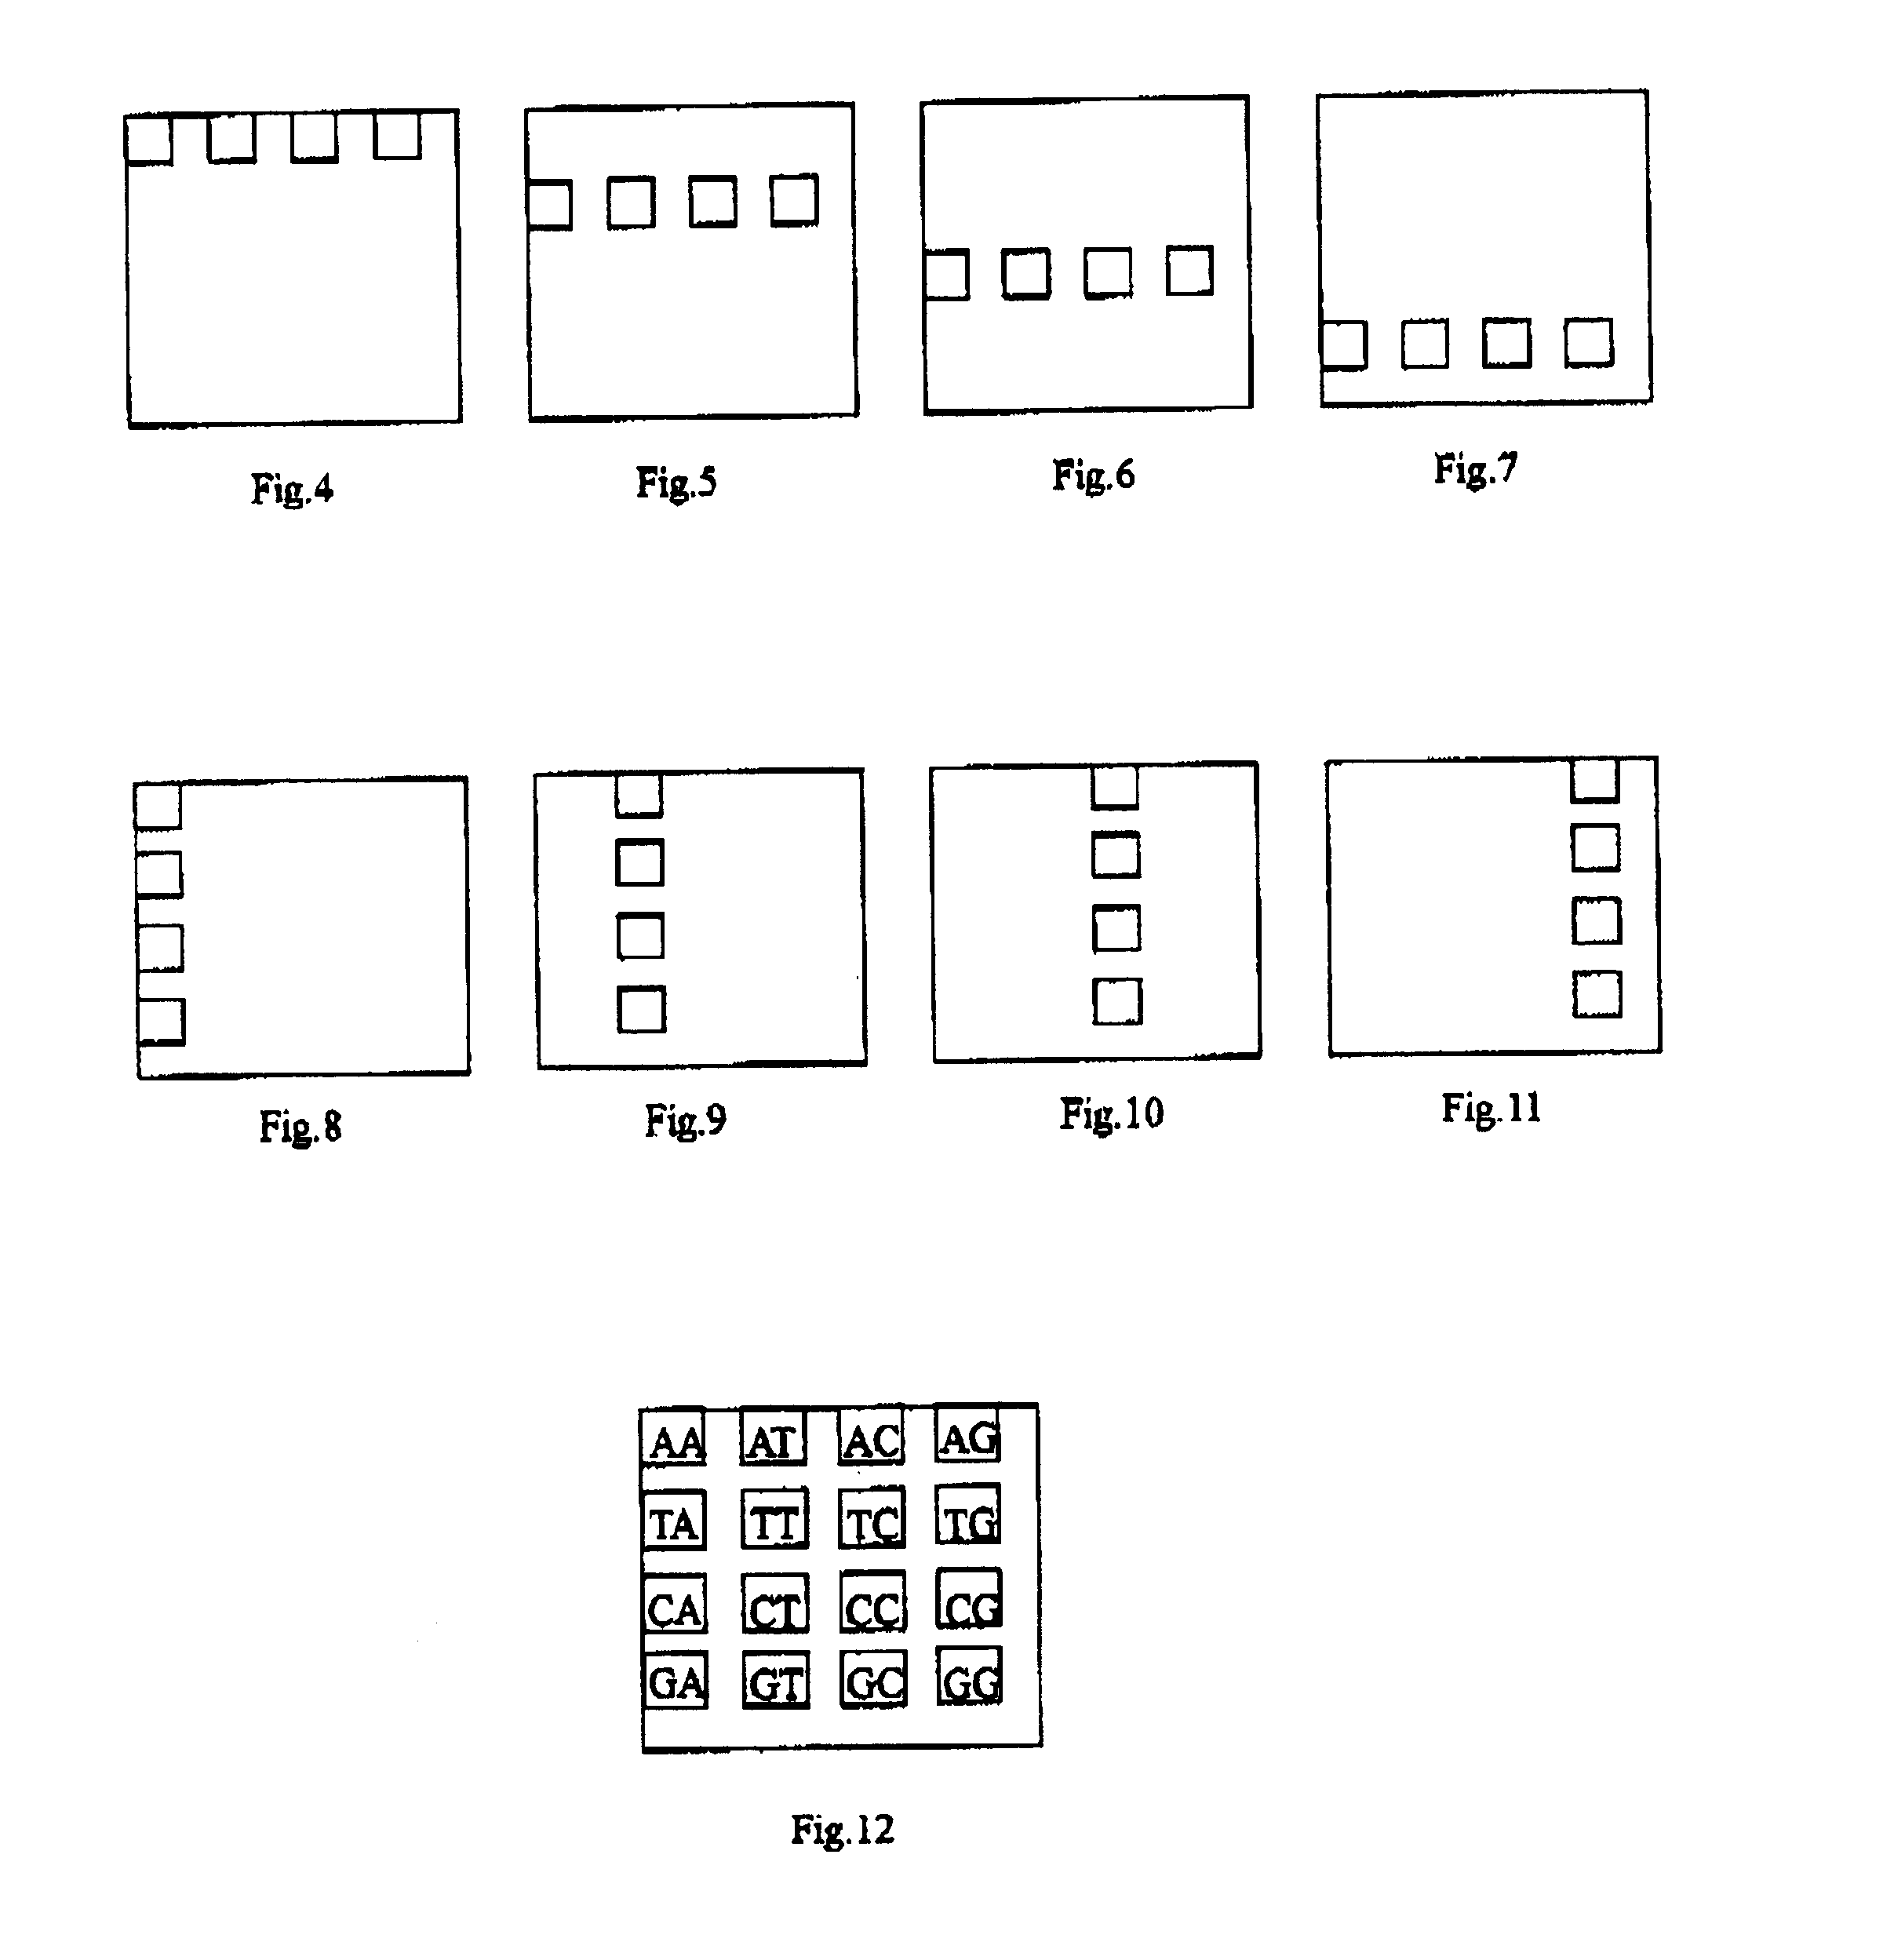 Method for the preparation of compound micro array chips and the compound micro array chips produced according to said method